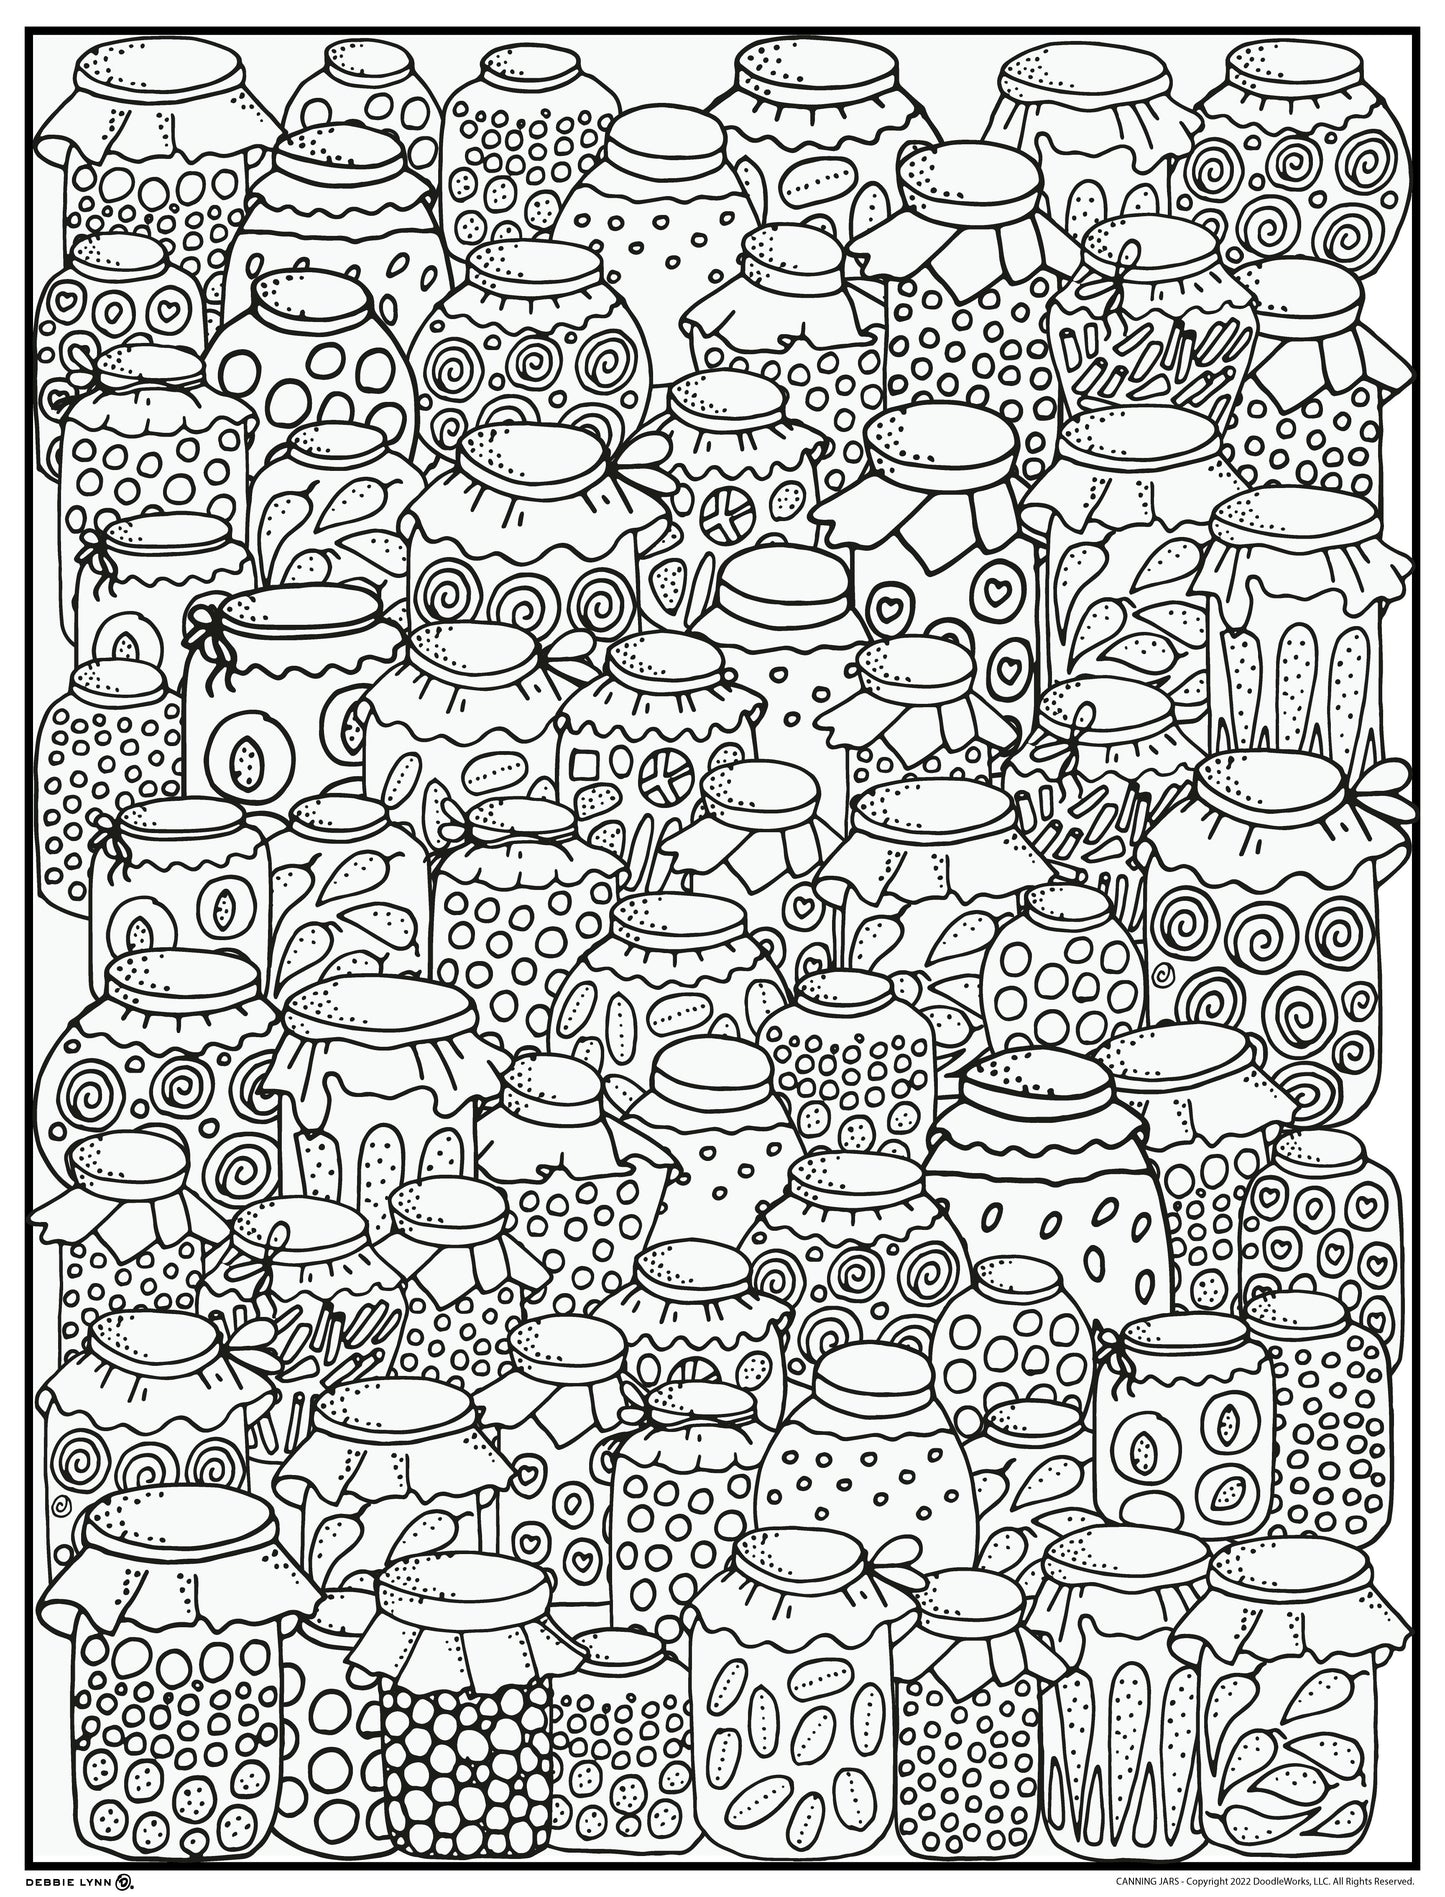 Canning Jars Personalized Giant Coloring Poster 46"x60"